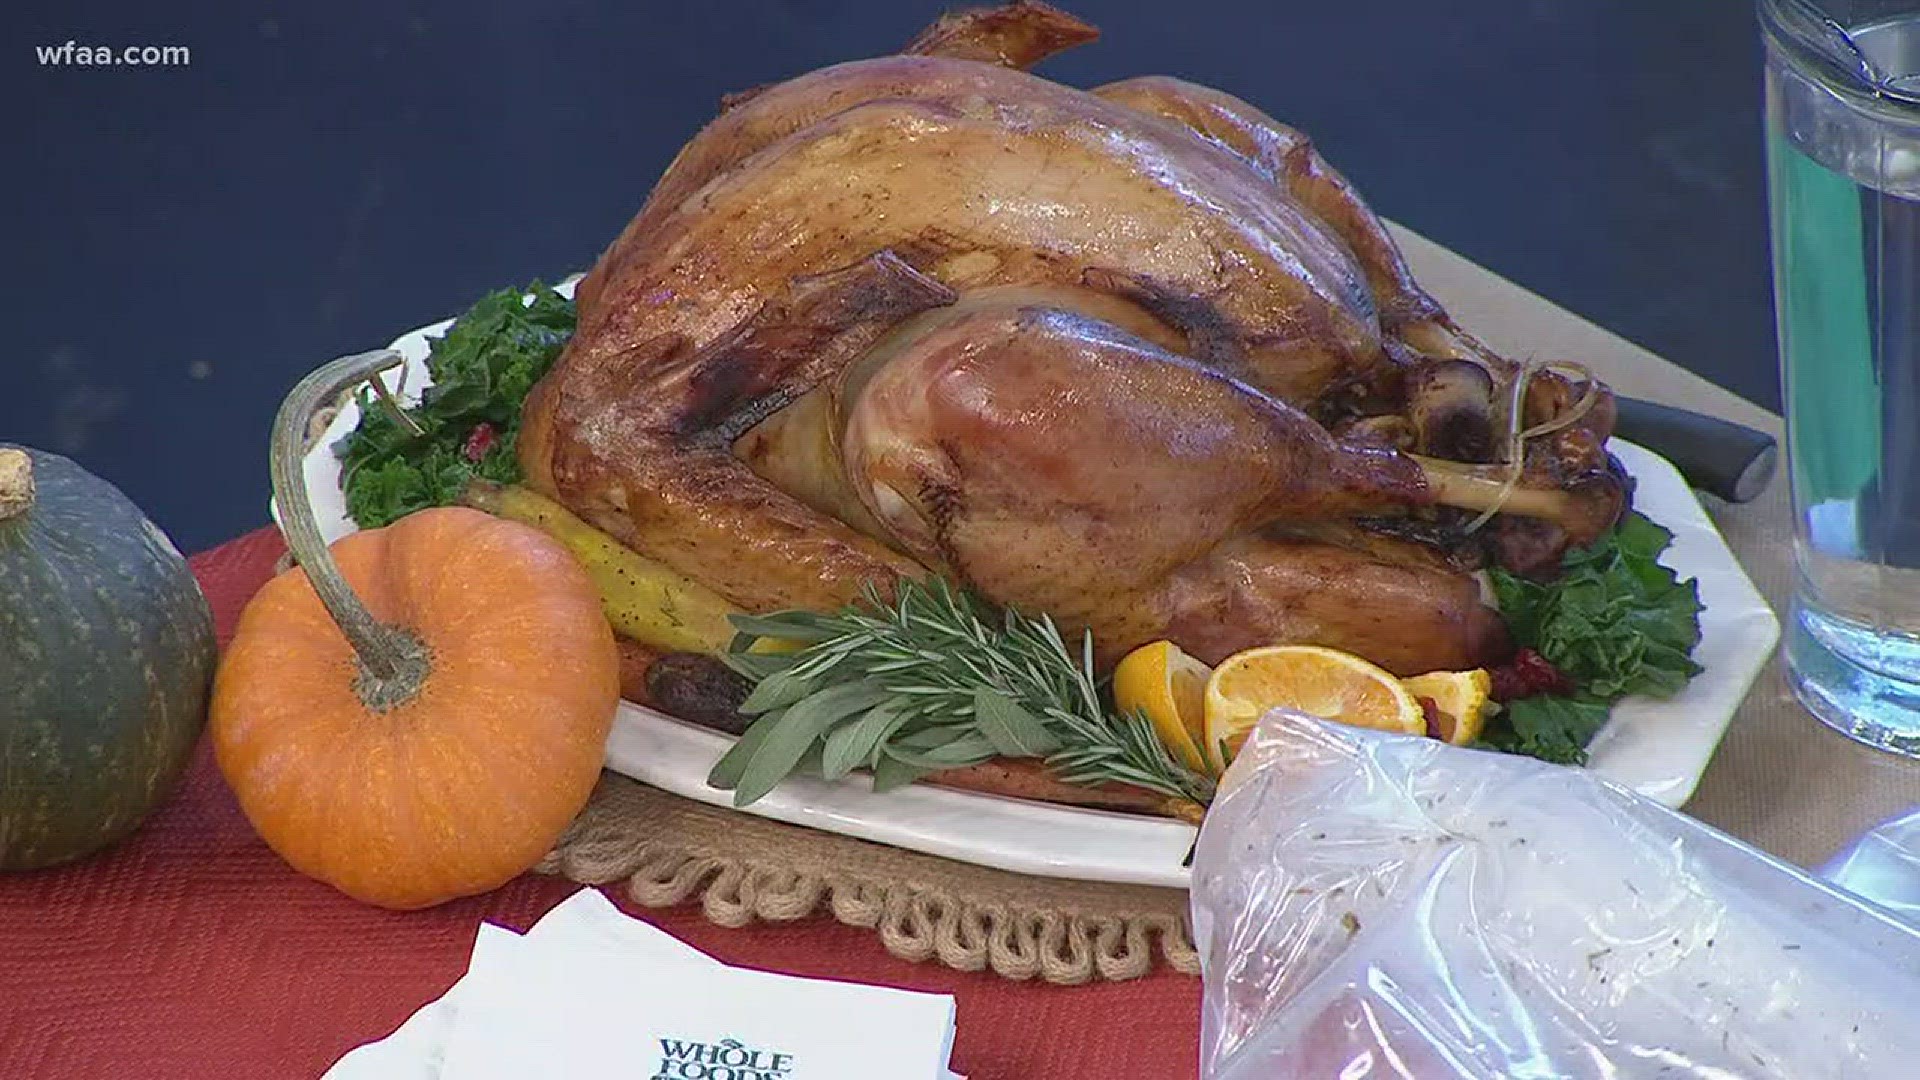 Whole Foods gives you tips on your Thanksgiving turkey